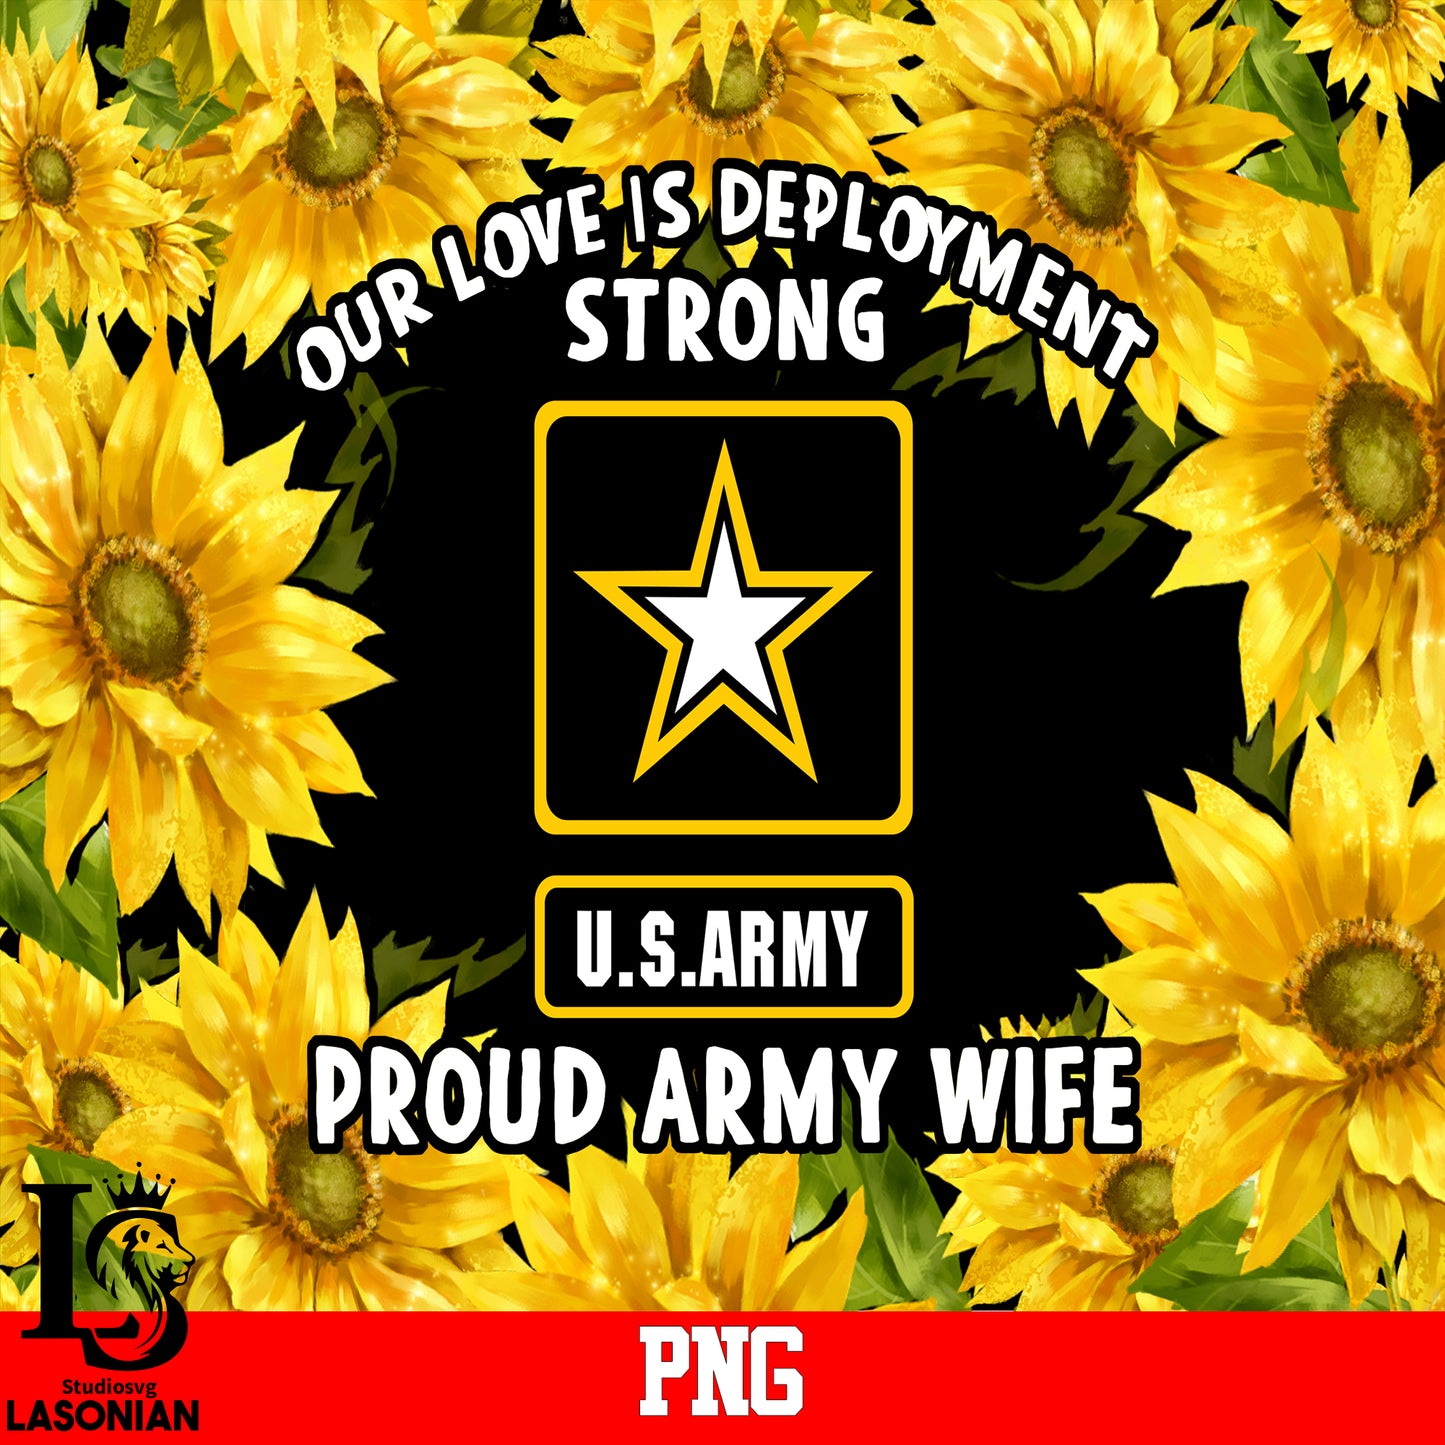 Our Love Is Deployment Proud Army Wife,U.S.ARMY PNG file